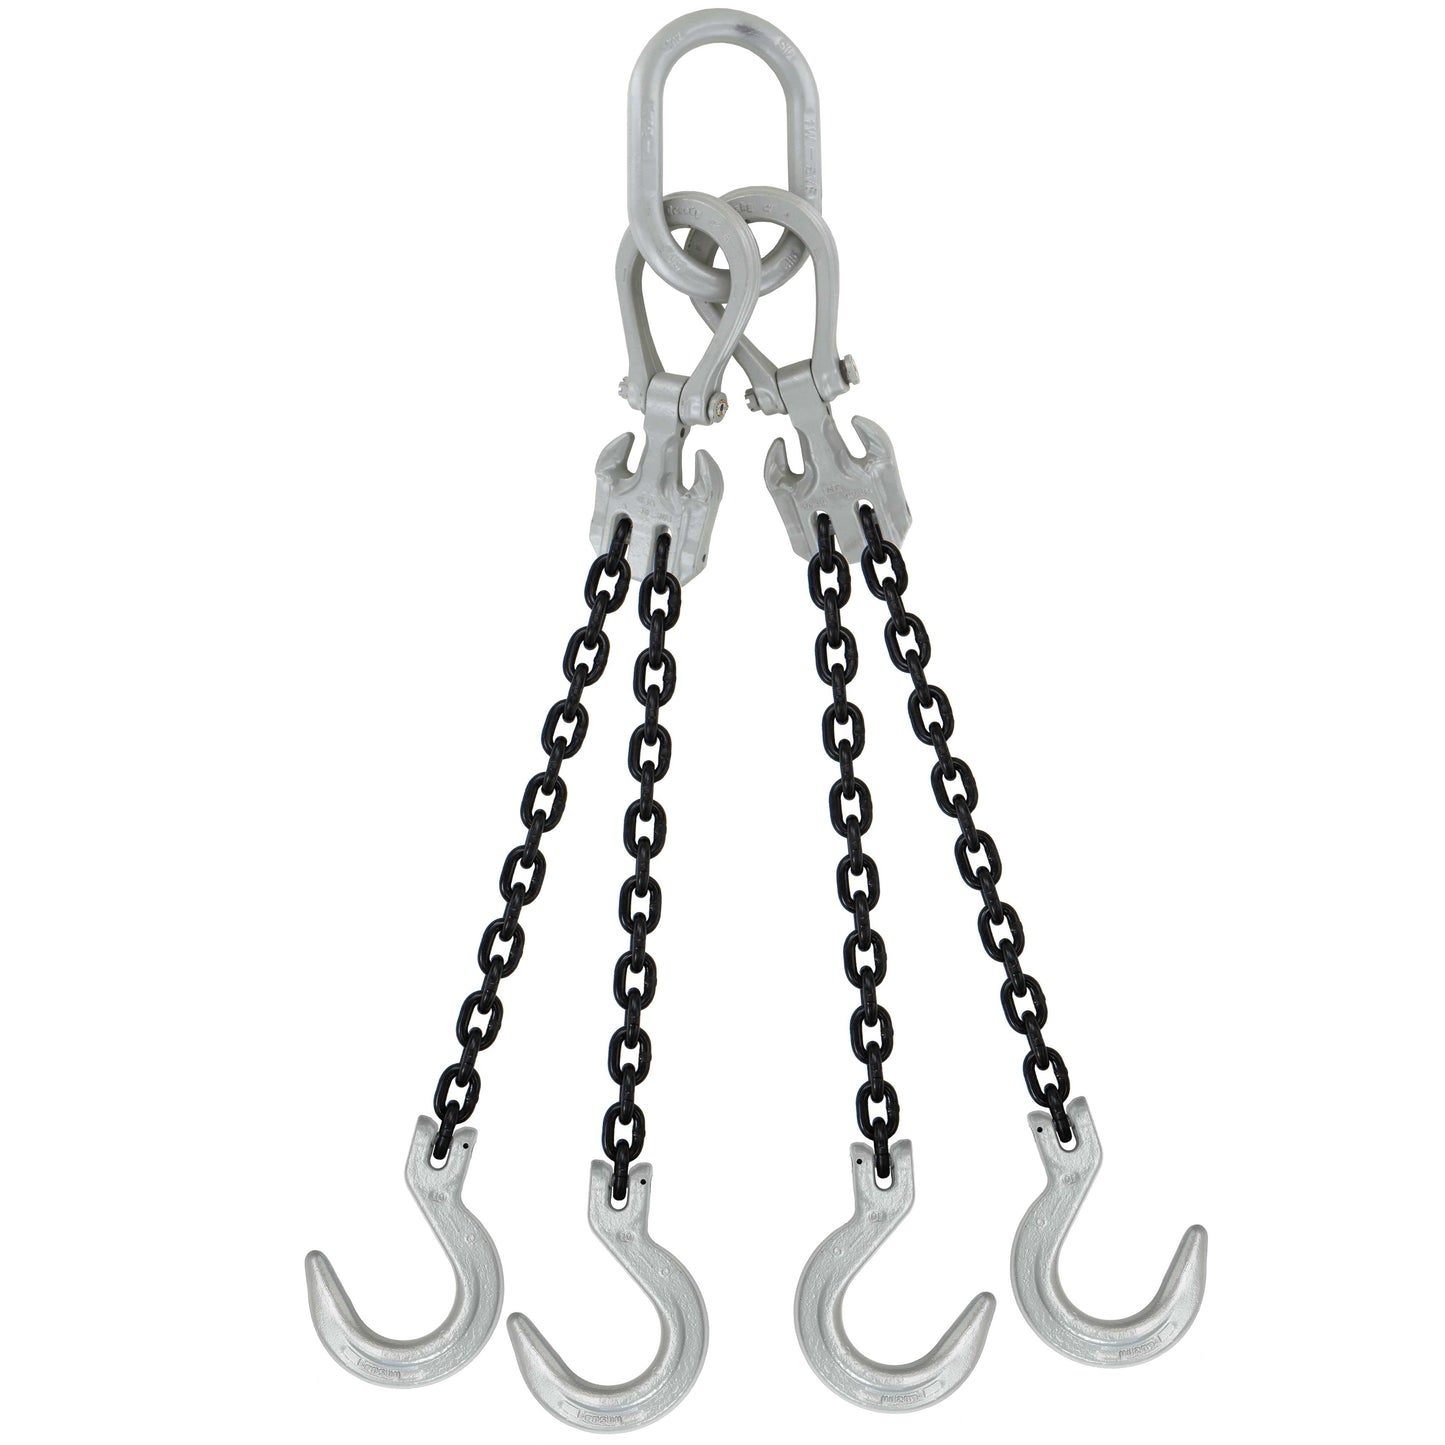 932 inch x 20 foot Domestic Adjustable 4 Leg Chain Sling w Crosby Foundry Hooks Grade 100 image 1 of 2